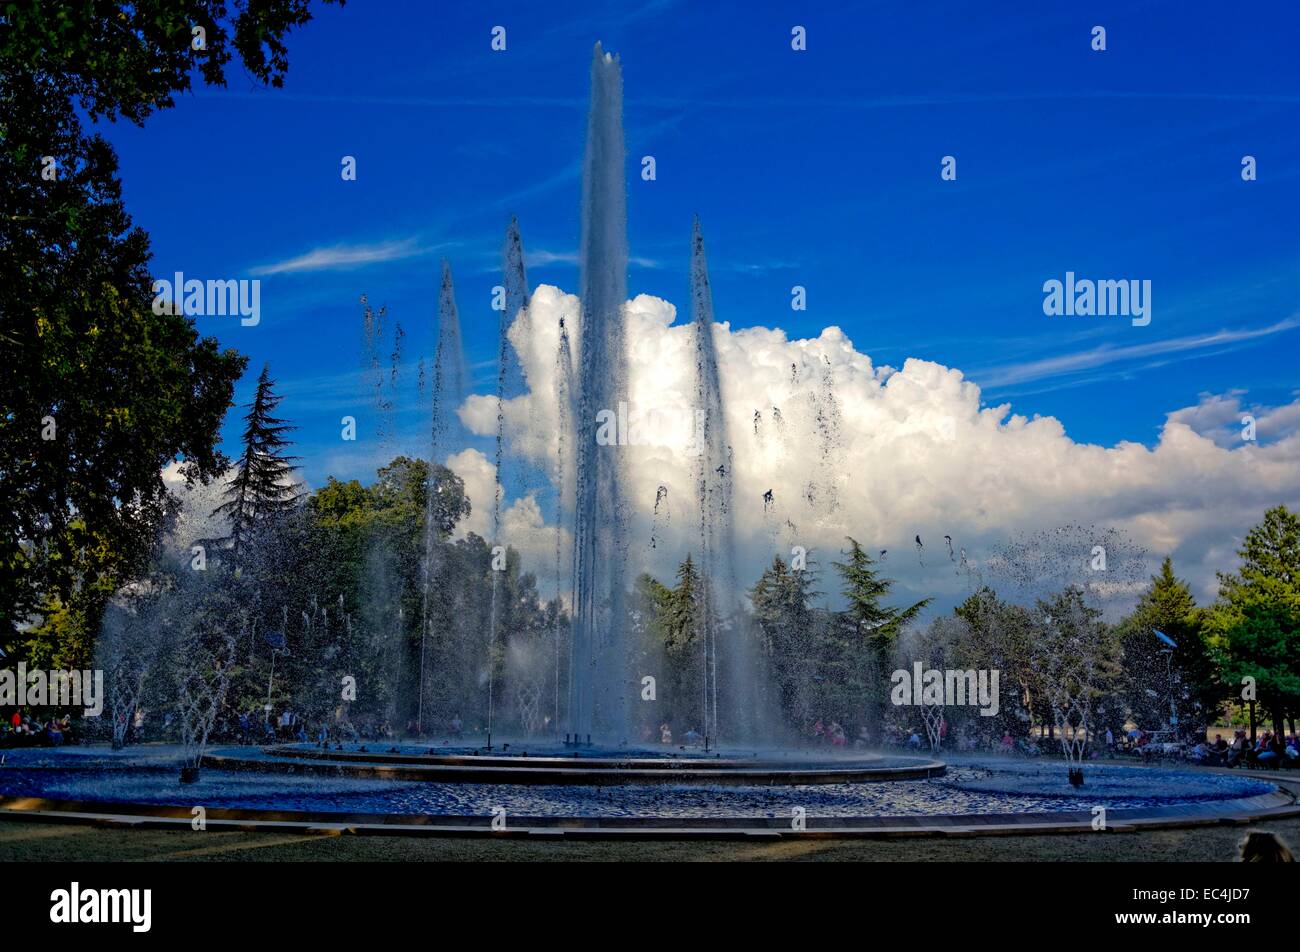 Fountain with large fountains, thunderstorm mood Stock Photo